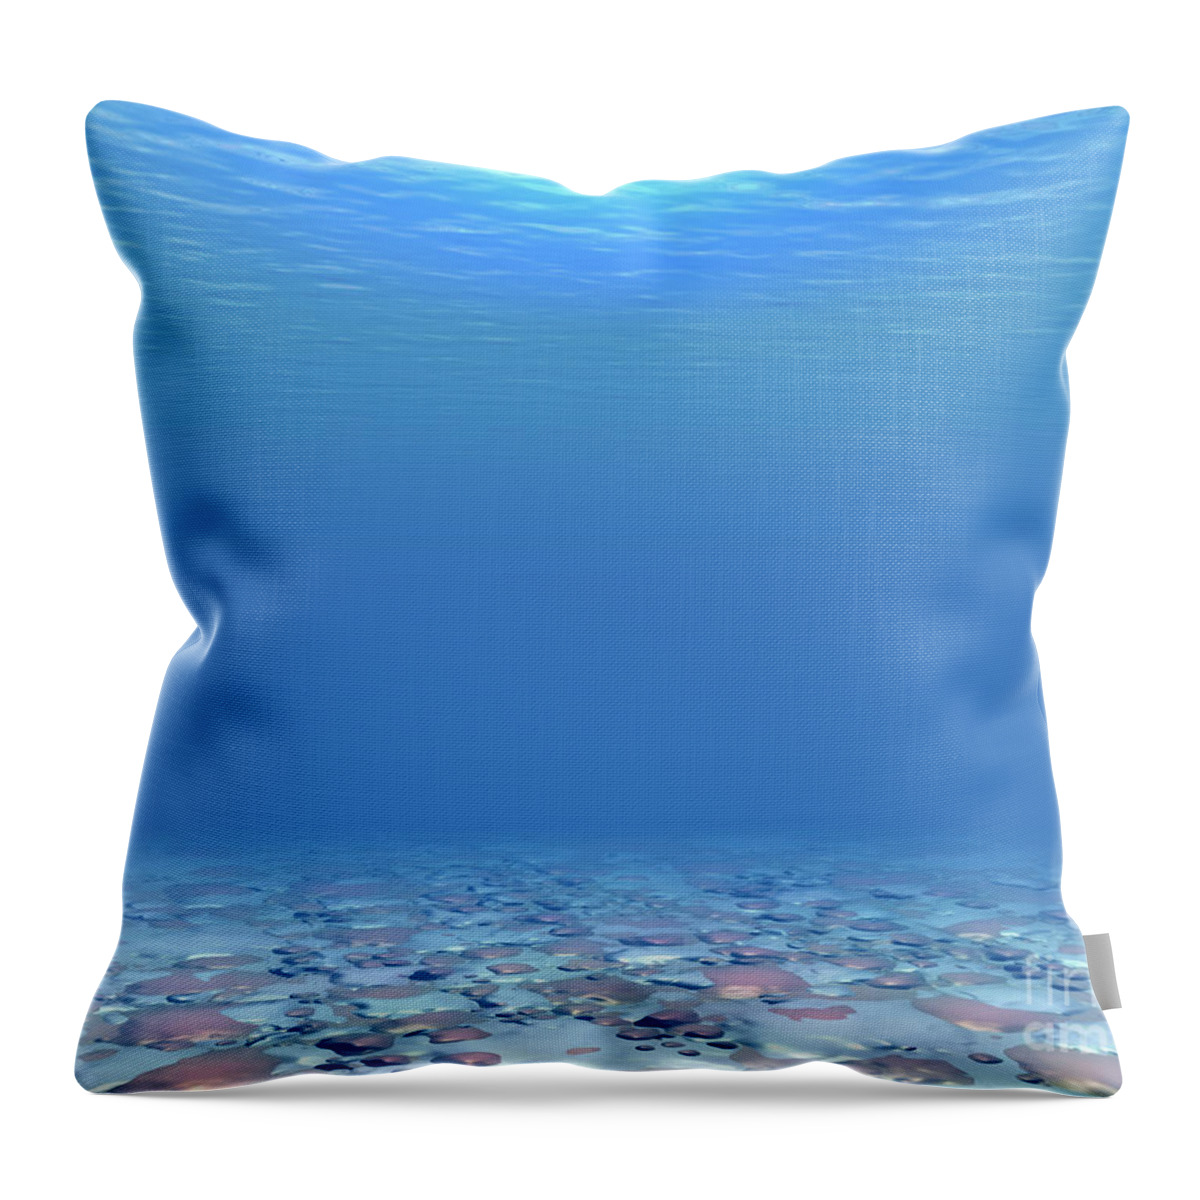 Sea Throw Pillow featuring the digital art Bottom of The Sea by Phil Perkins